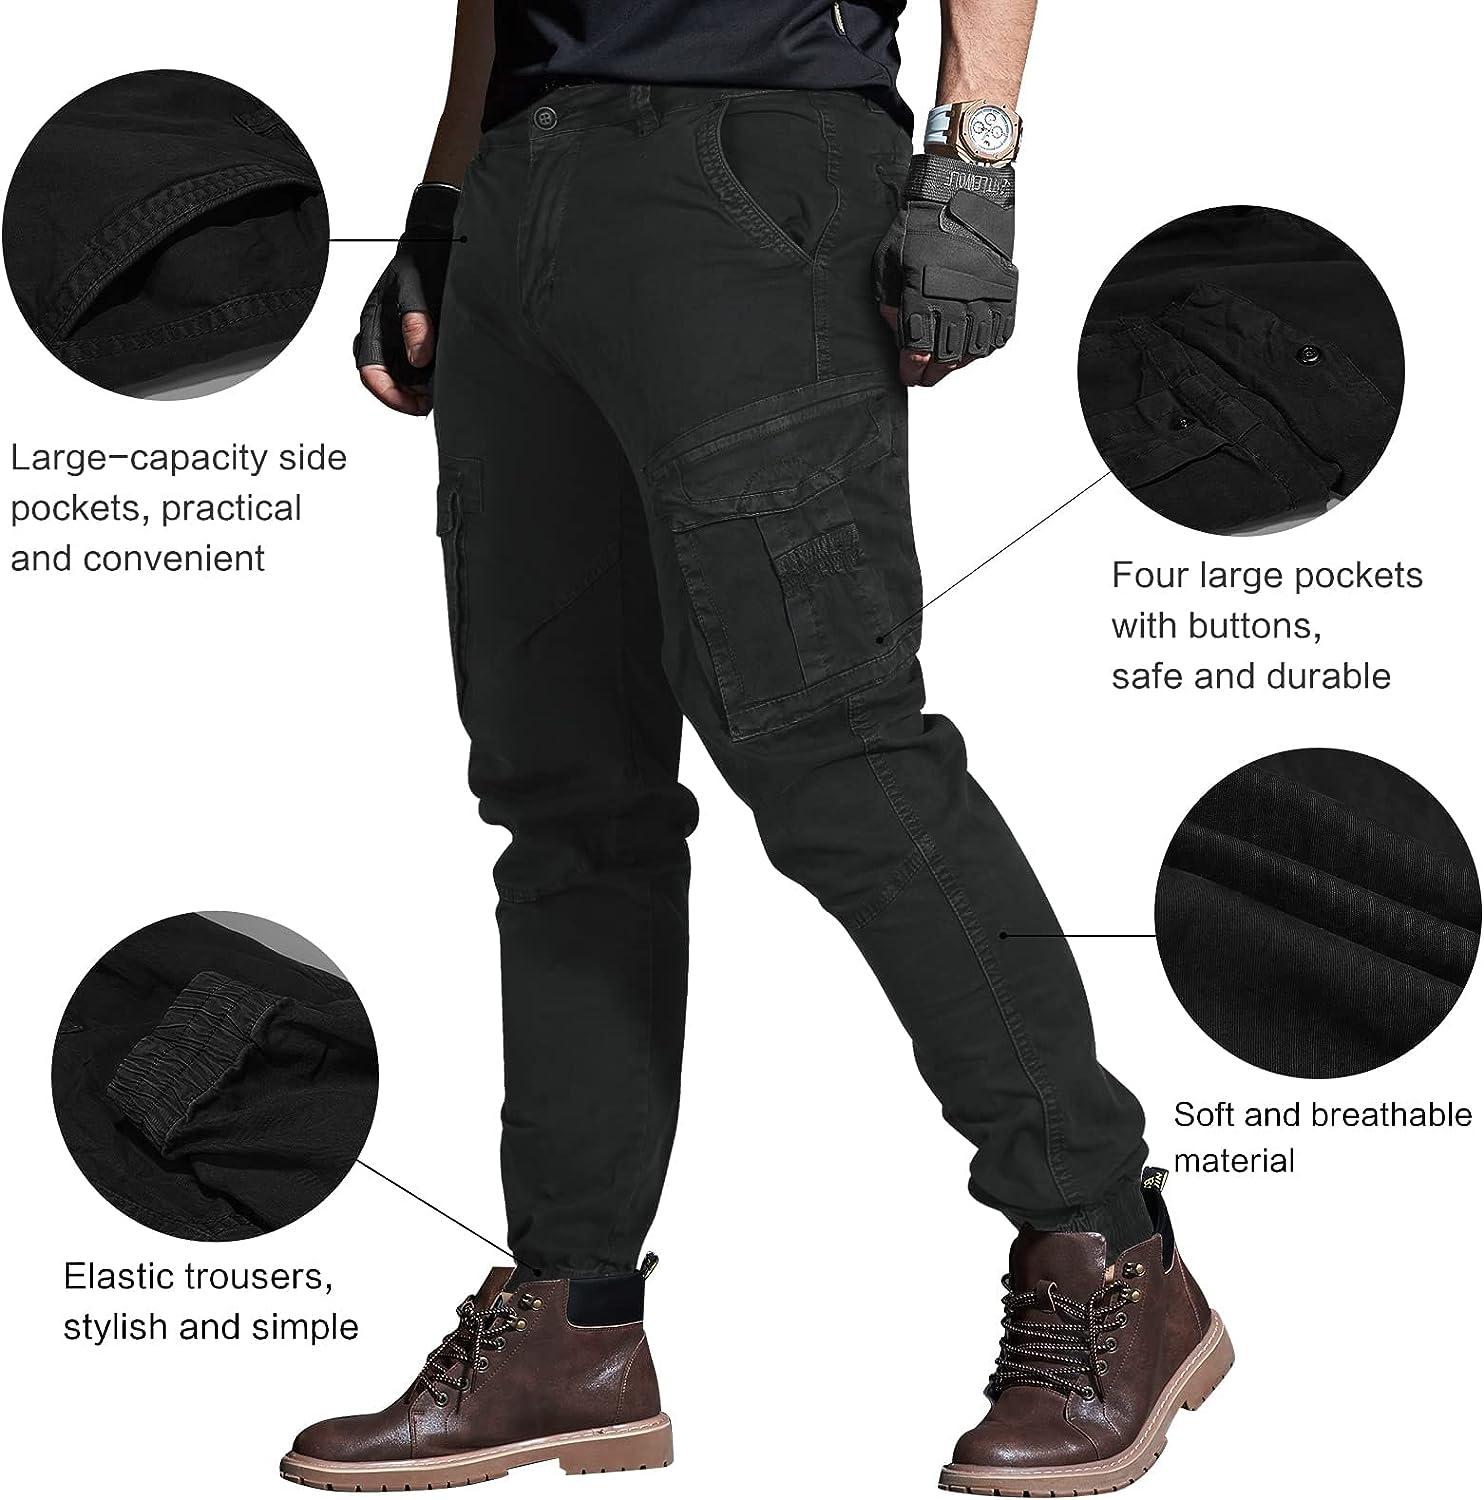 OUTSON Men's Work Cargo Pants with Multi-Pockets Construction Flex Pants  Ripstop Outdoor Hiking for Men Black 36